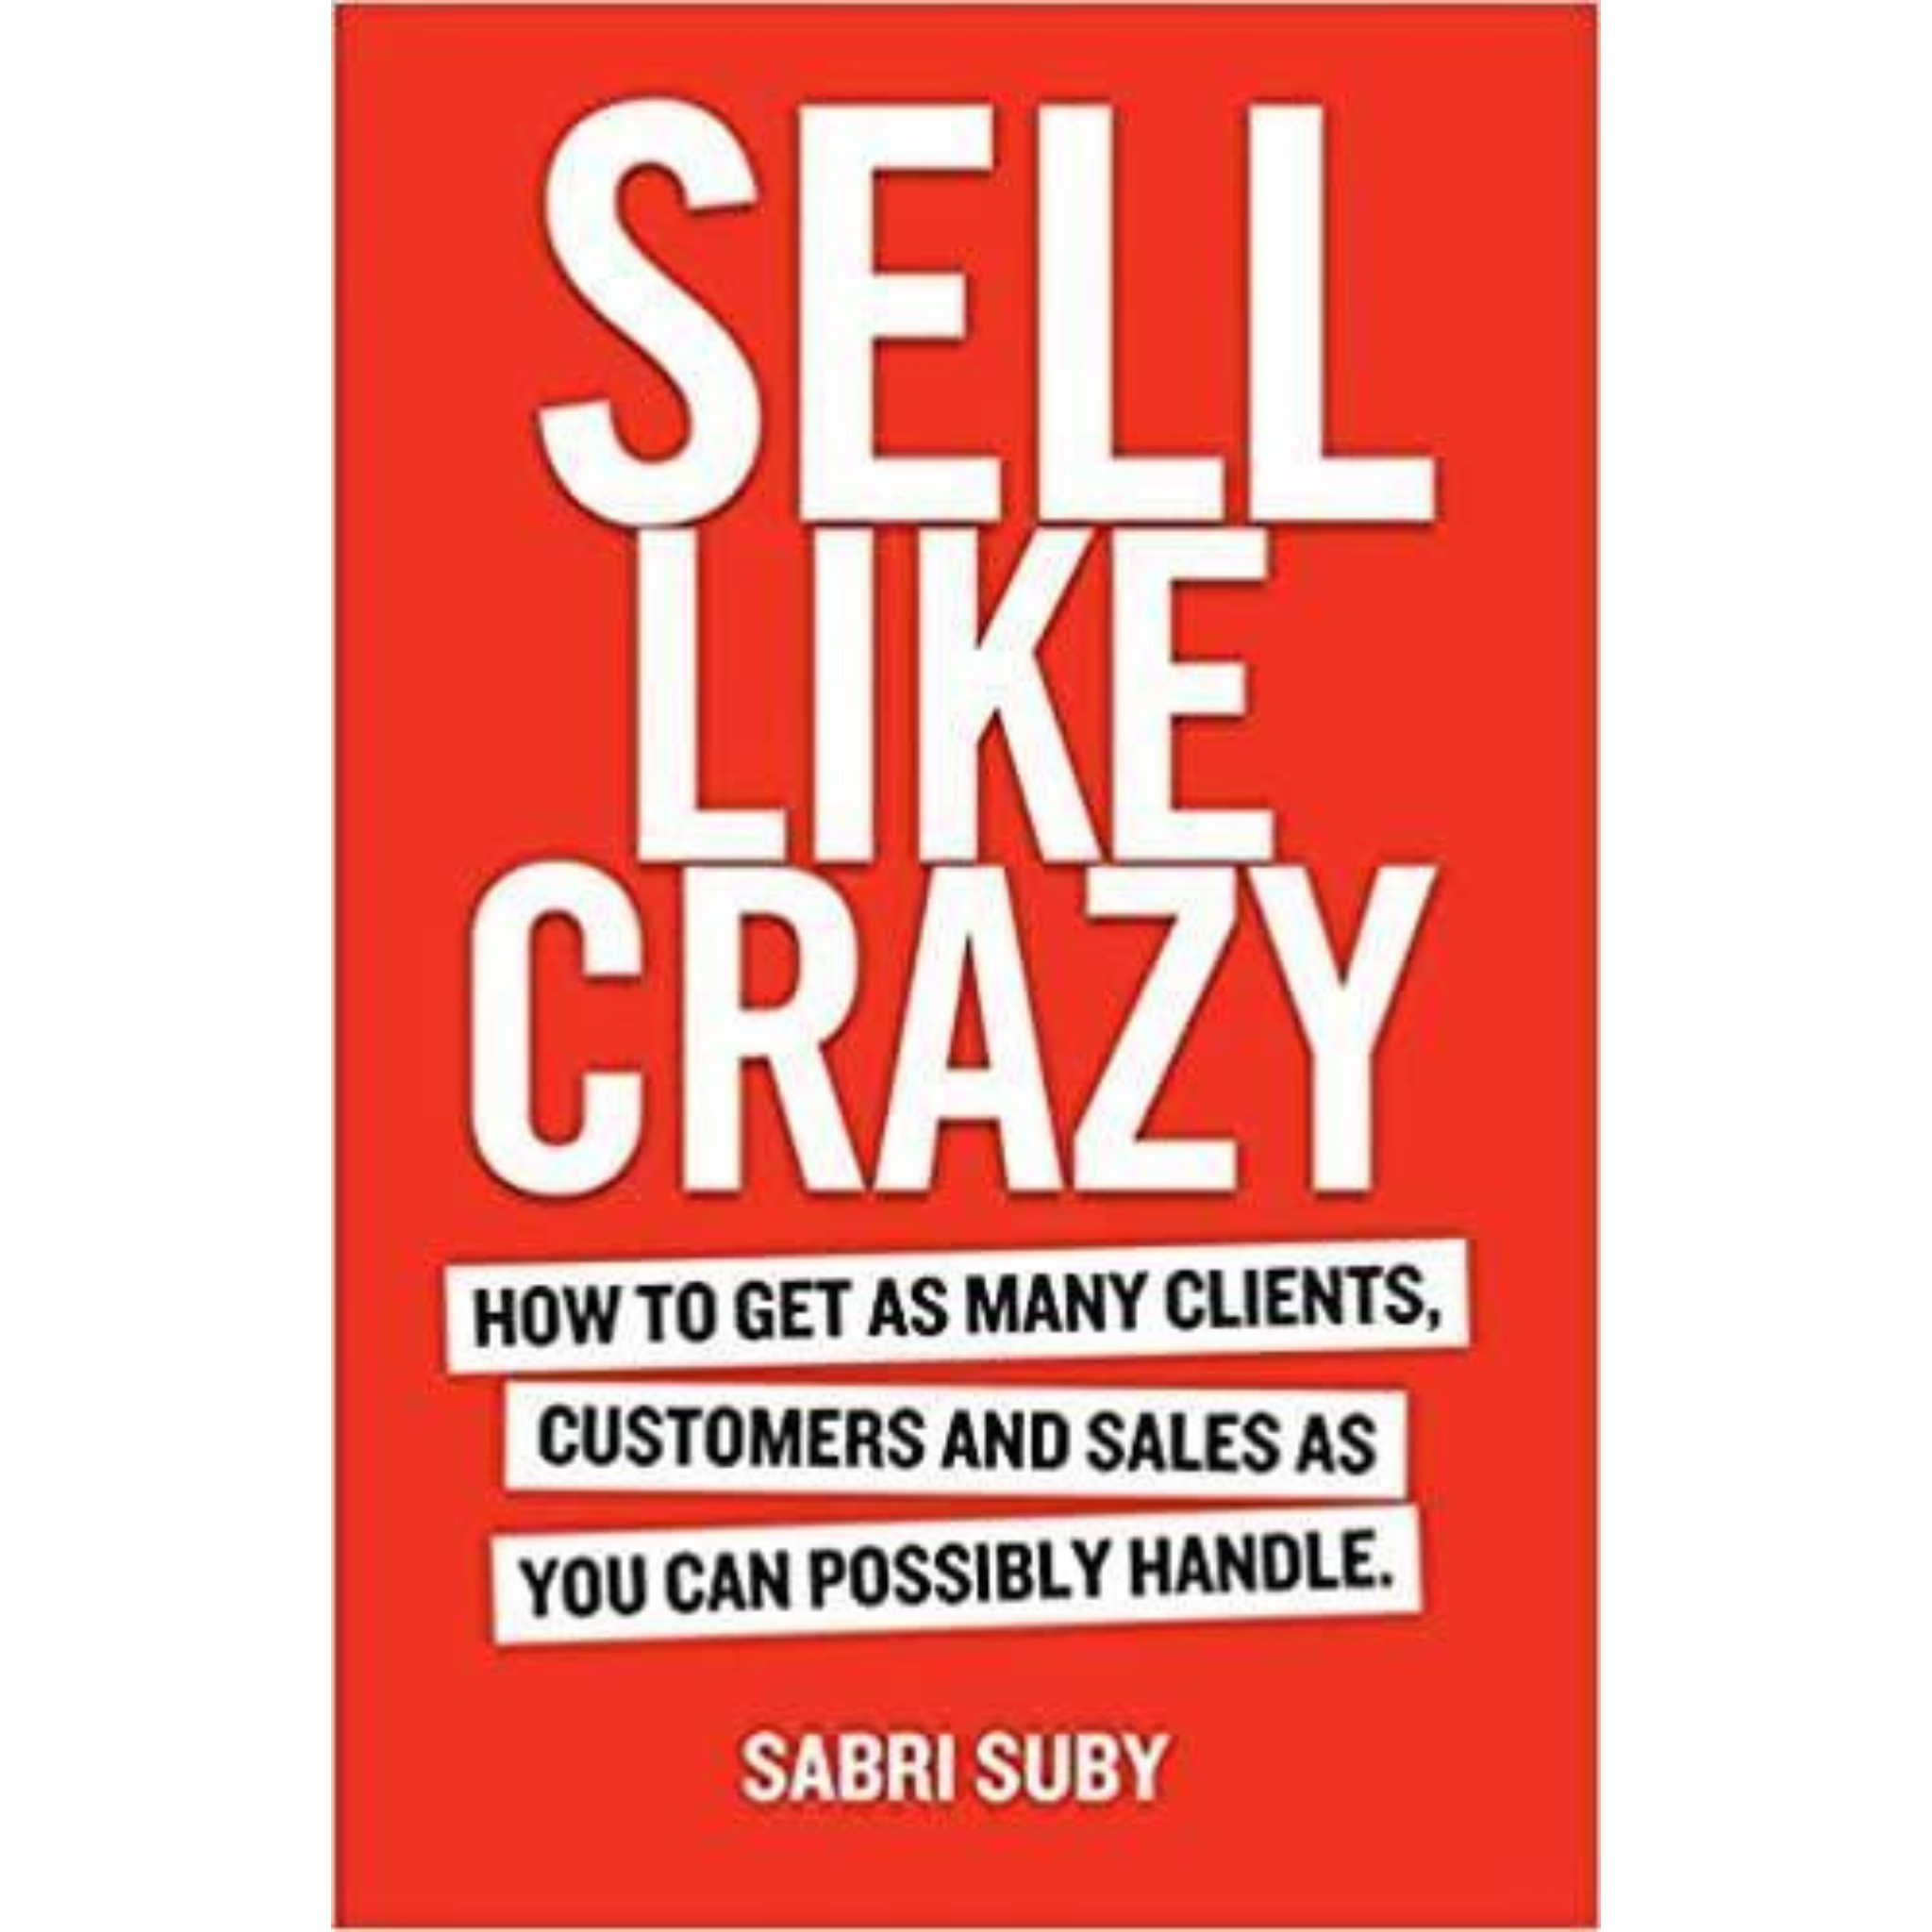 Sell Like Crazy By SABRI SUBY